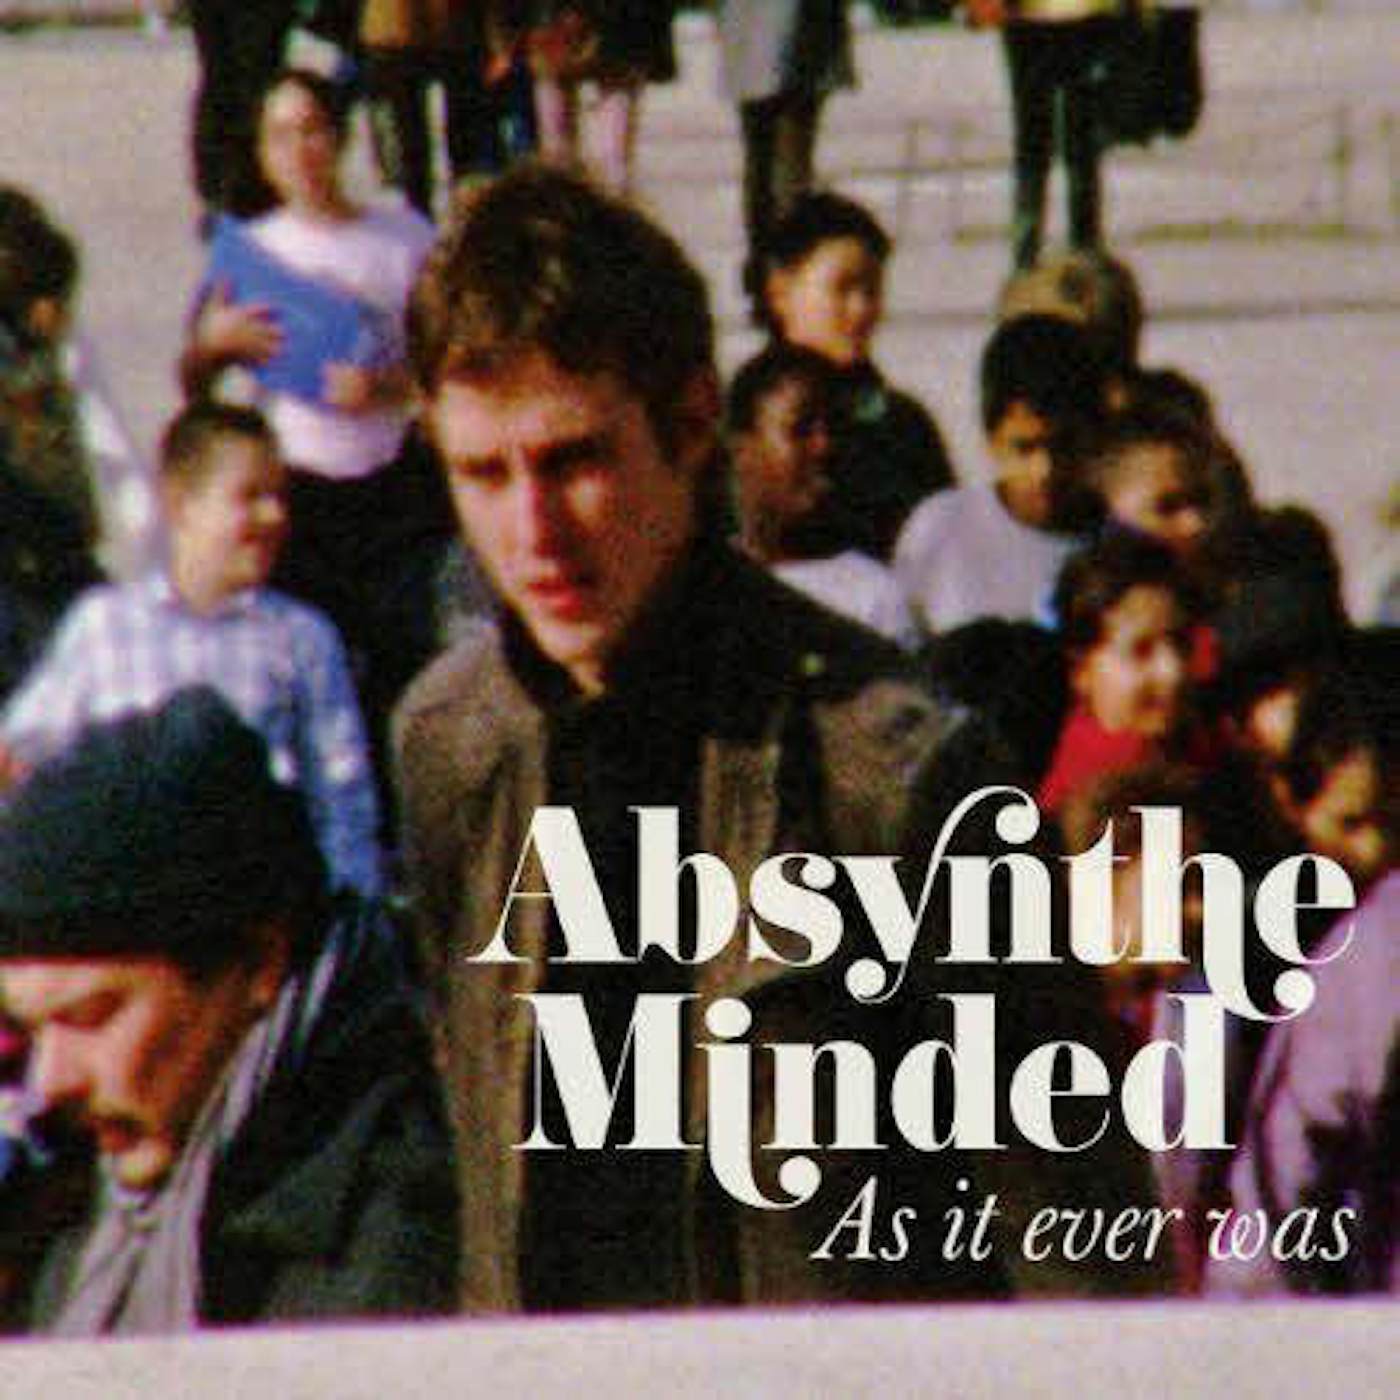 Absynthe Minded As It Ever Was Vinyl Record